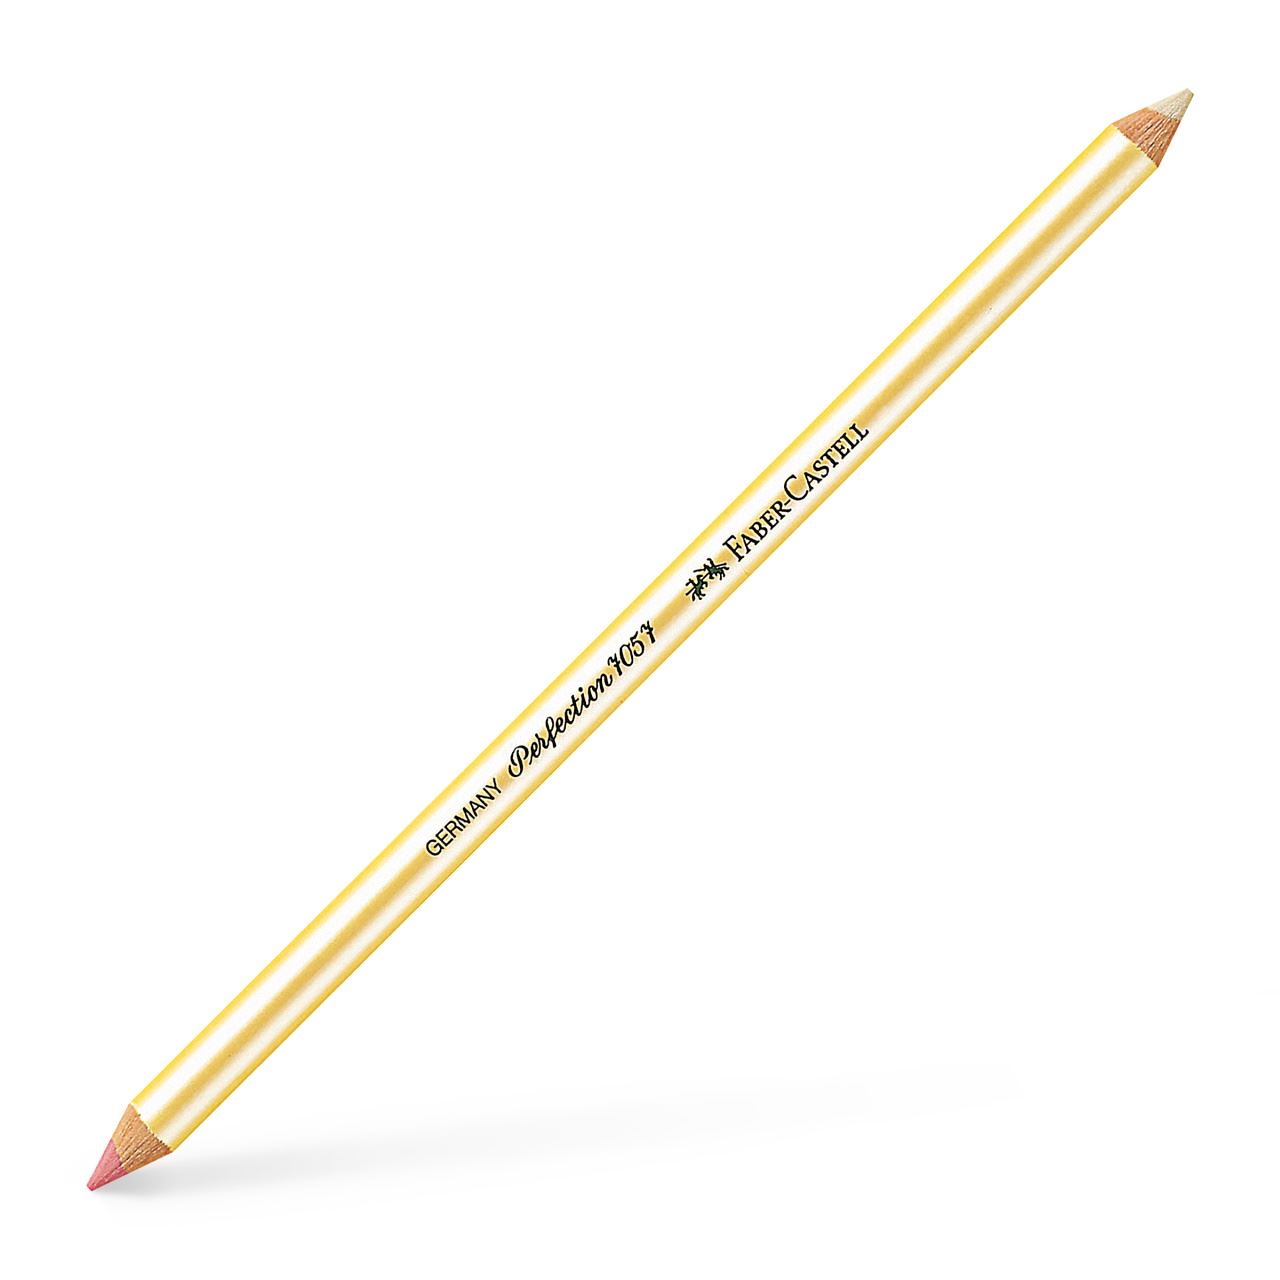 Faber-Castell - Perfection 7057 eraser pencil